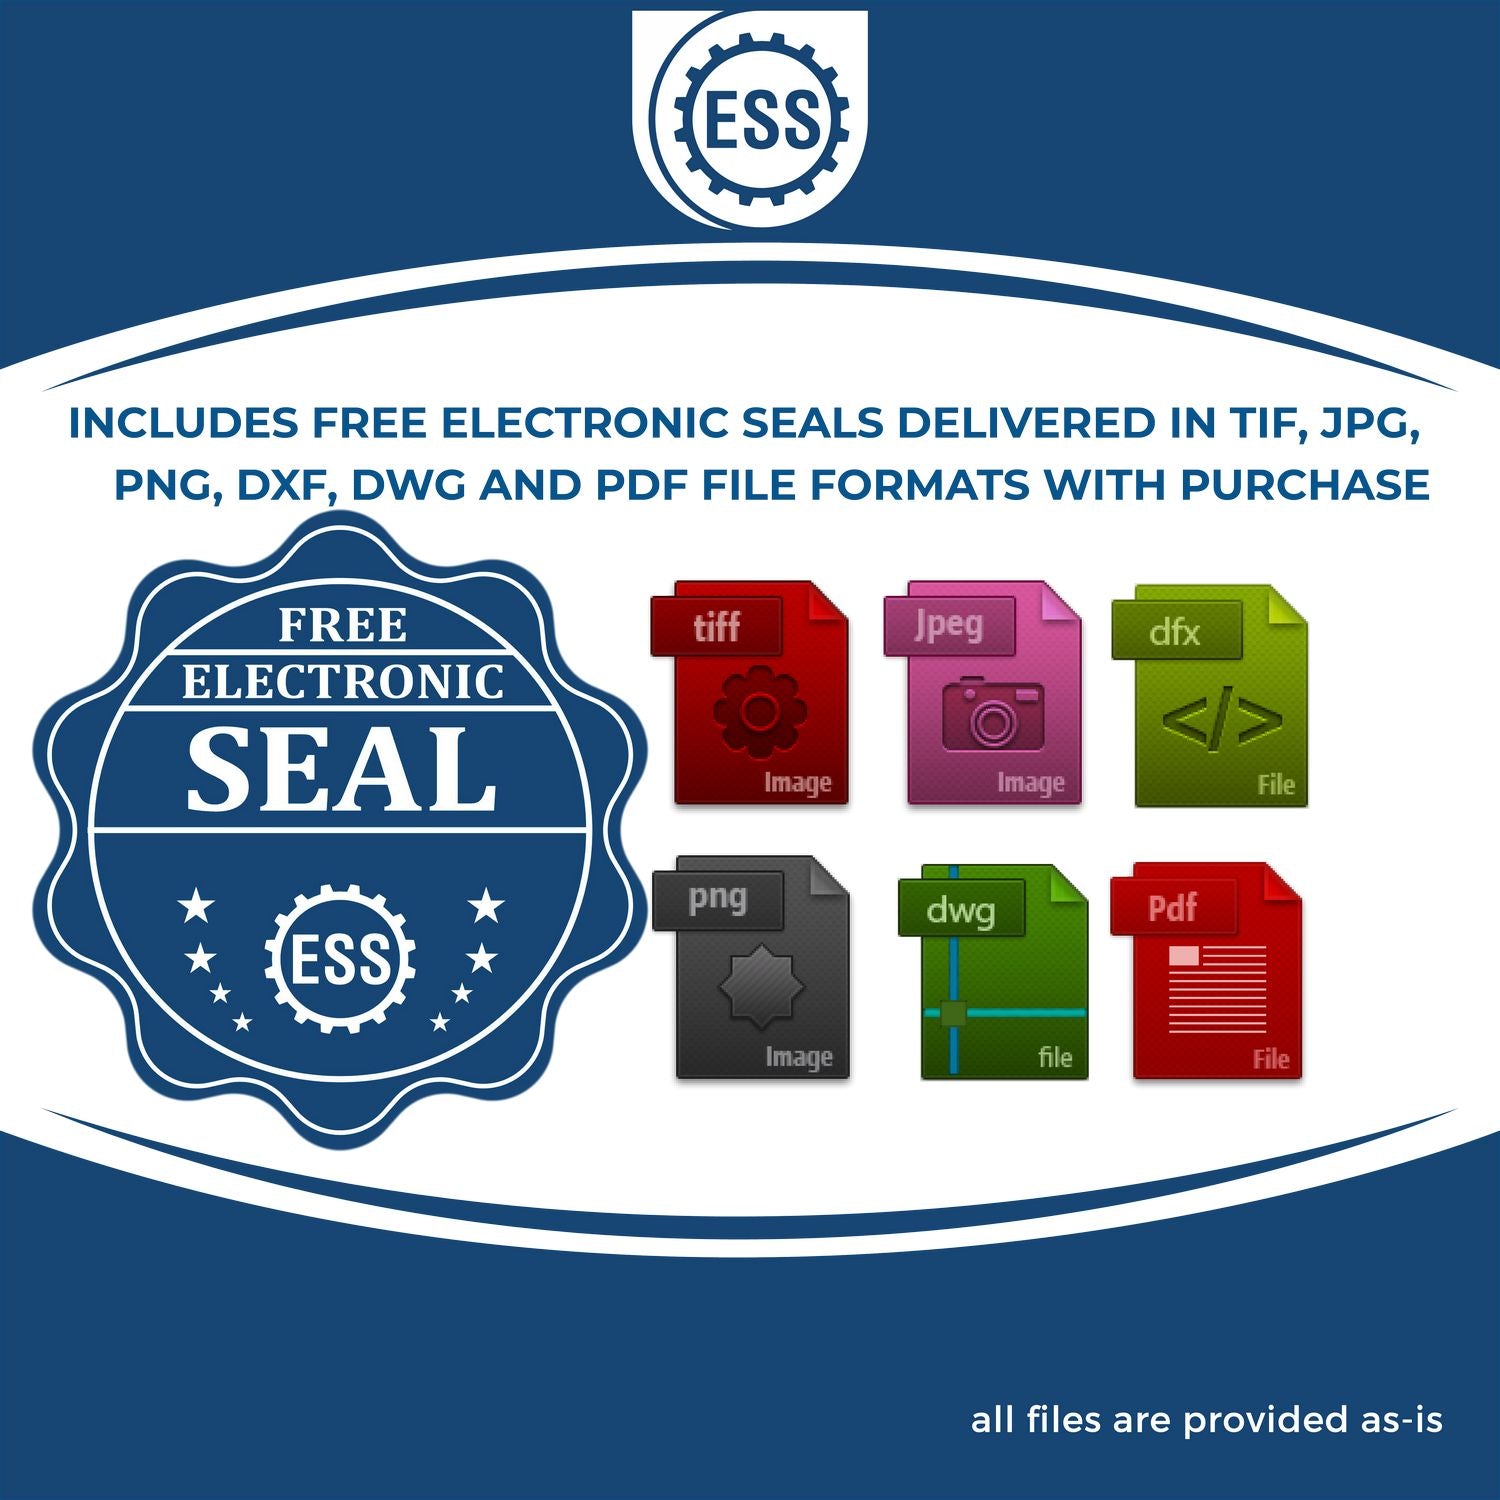 An infographic for the free electronic seal for the Puerto Rico Engineer Desk Seal illustrating the different file type icons such as DXF, DWG, TIF, JPG and PNG.